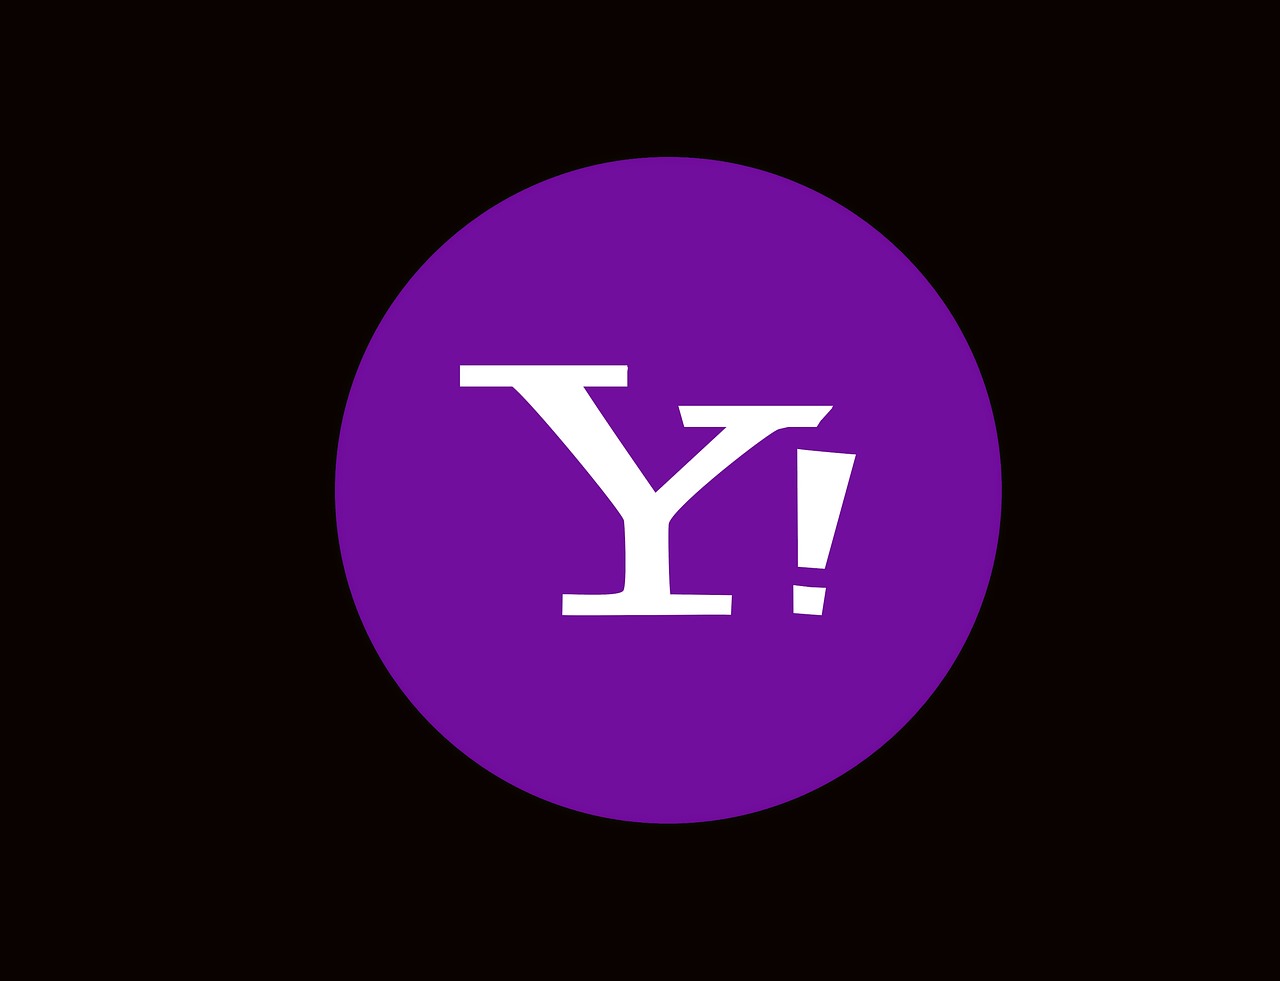 Download Free Photo Of Yahoo Internet Search Engine Networking Logo From Needpix Com